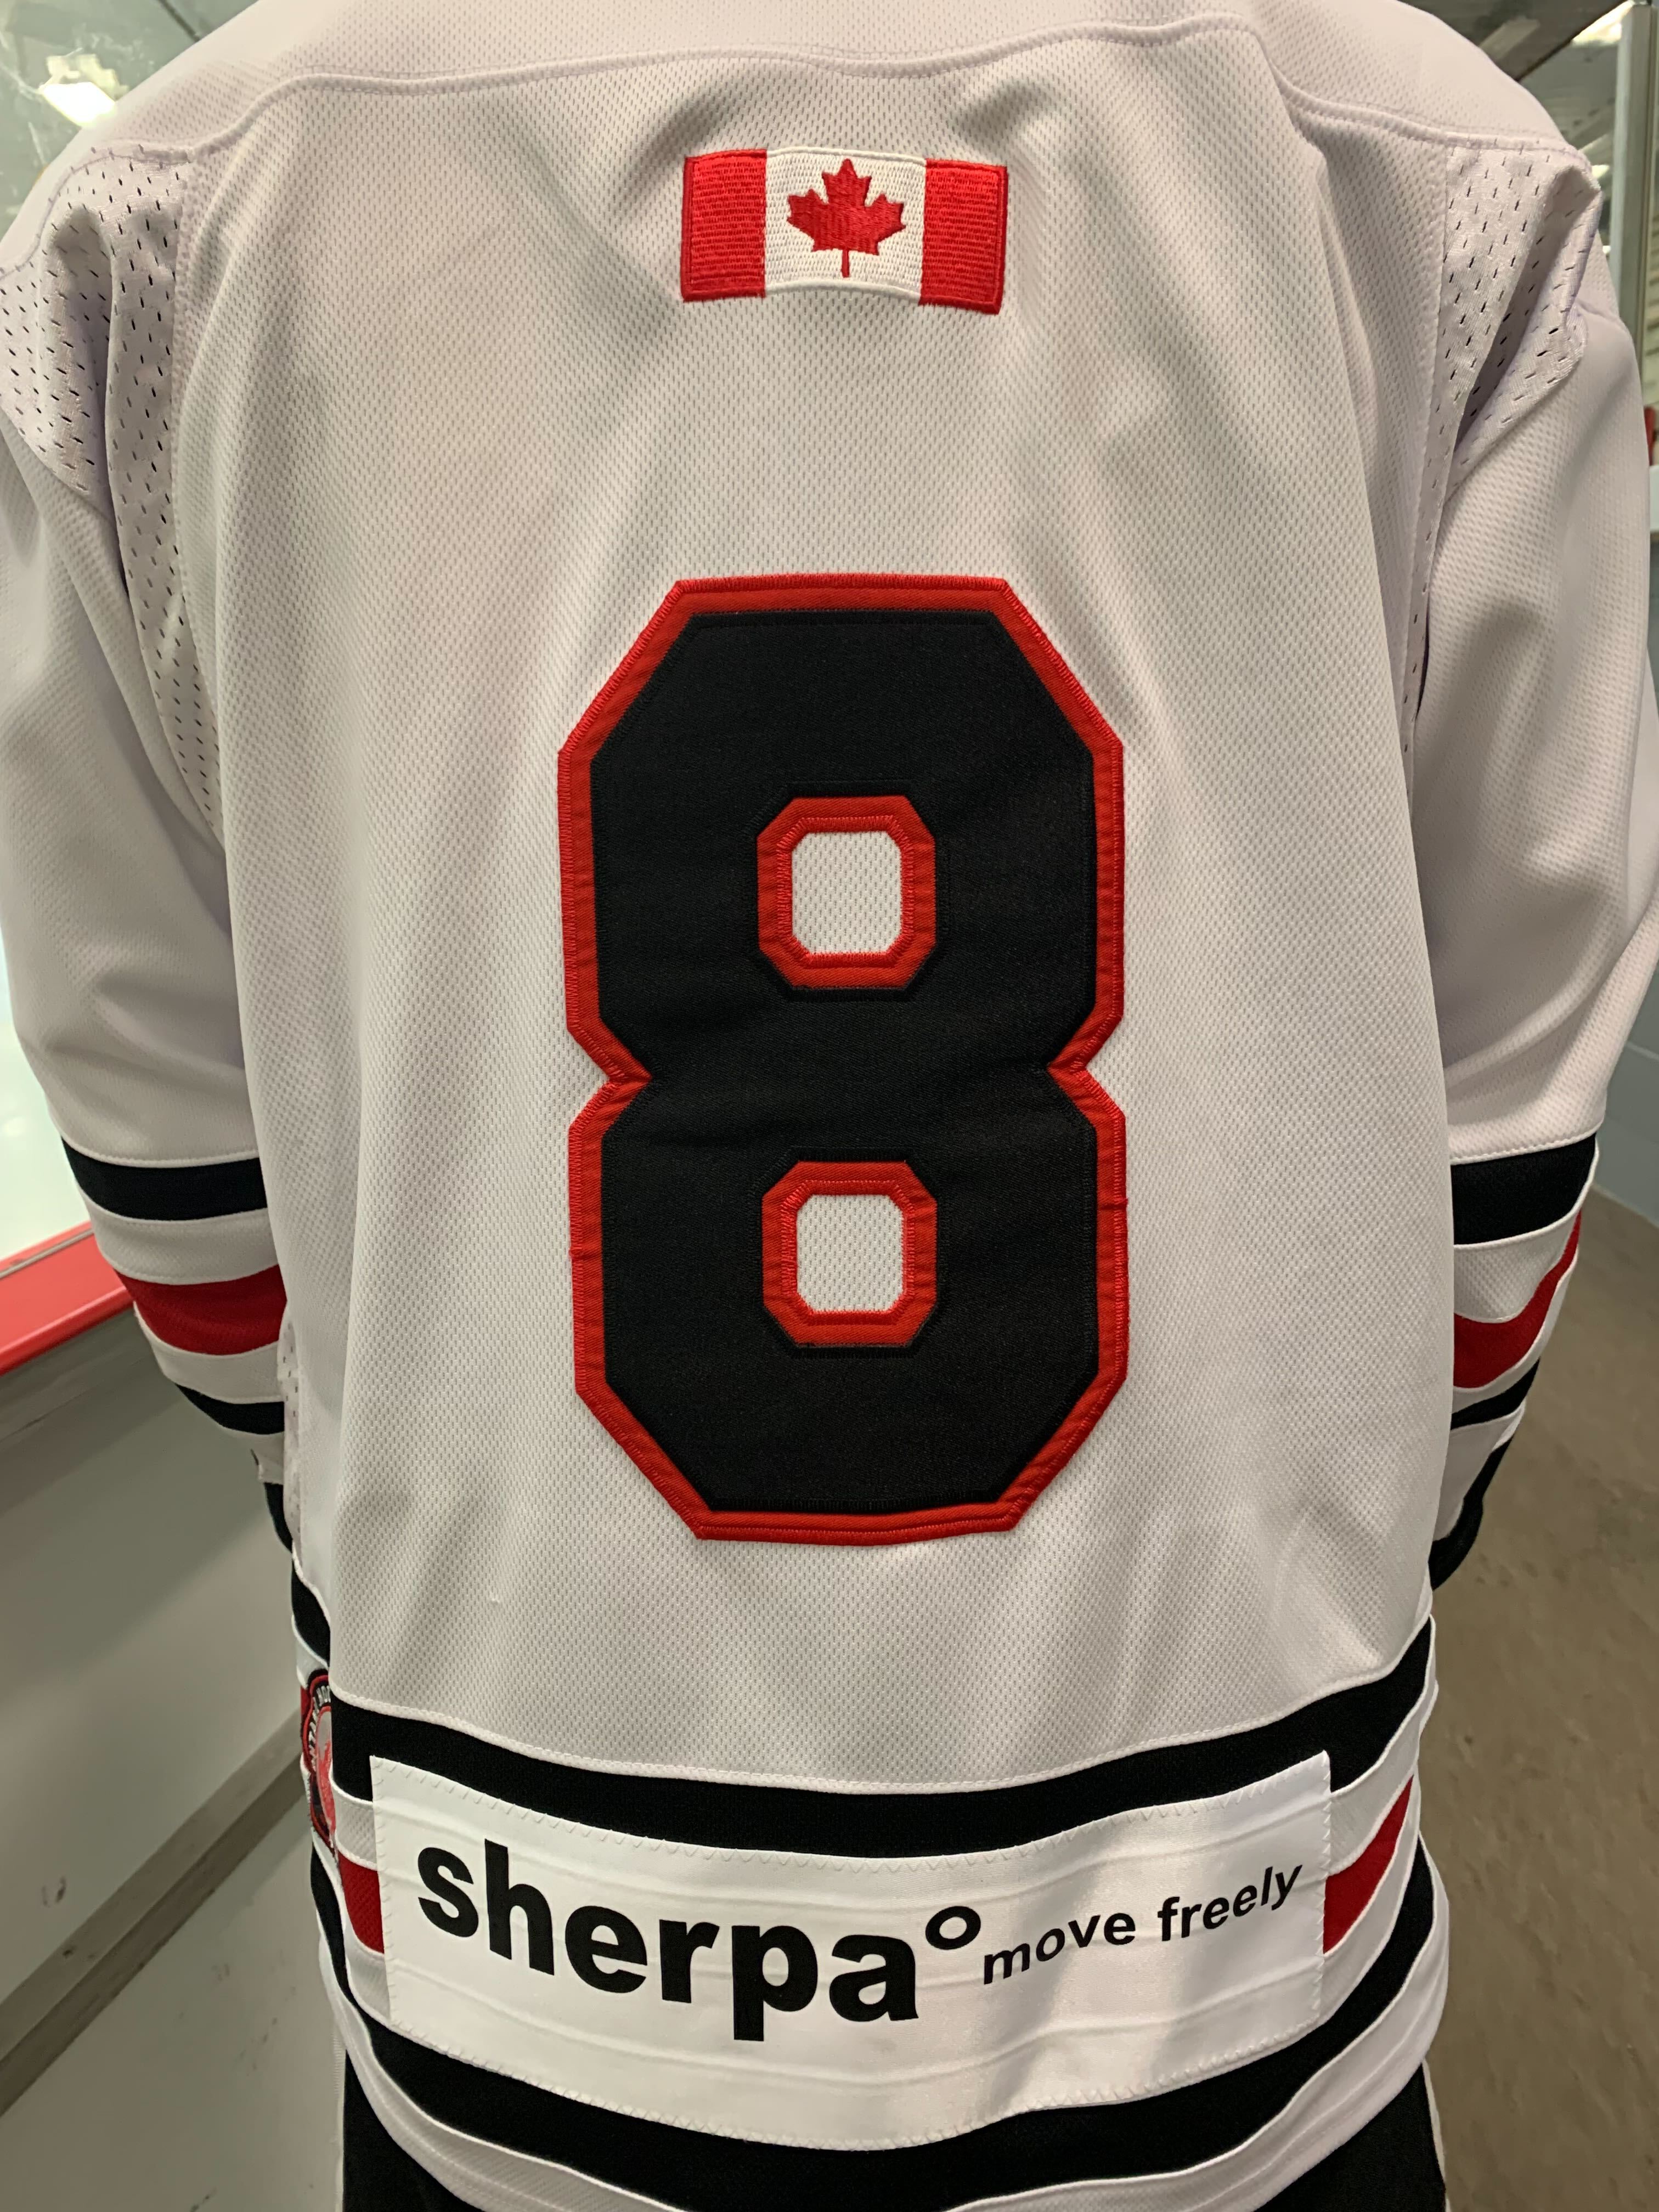 Schomberg Cougars jersey with sherpa° logo